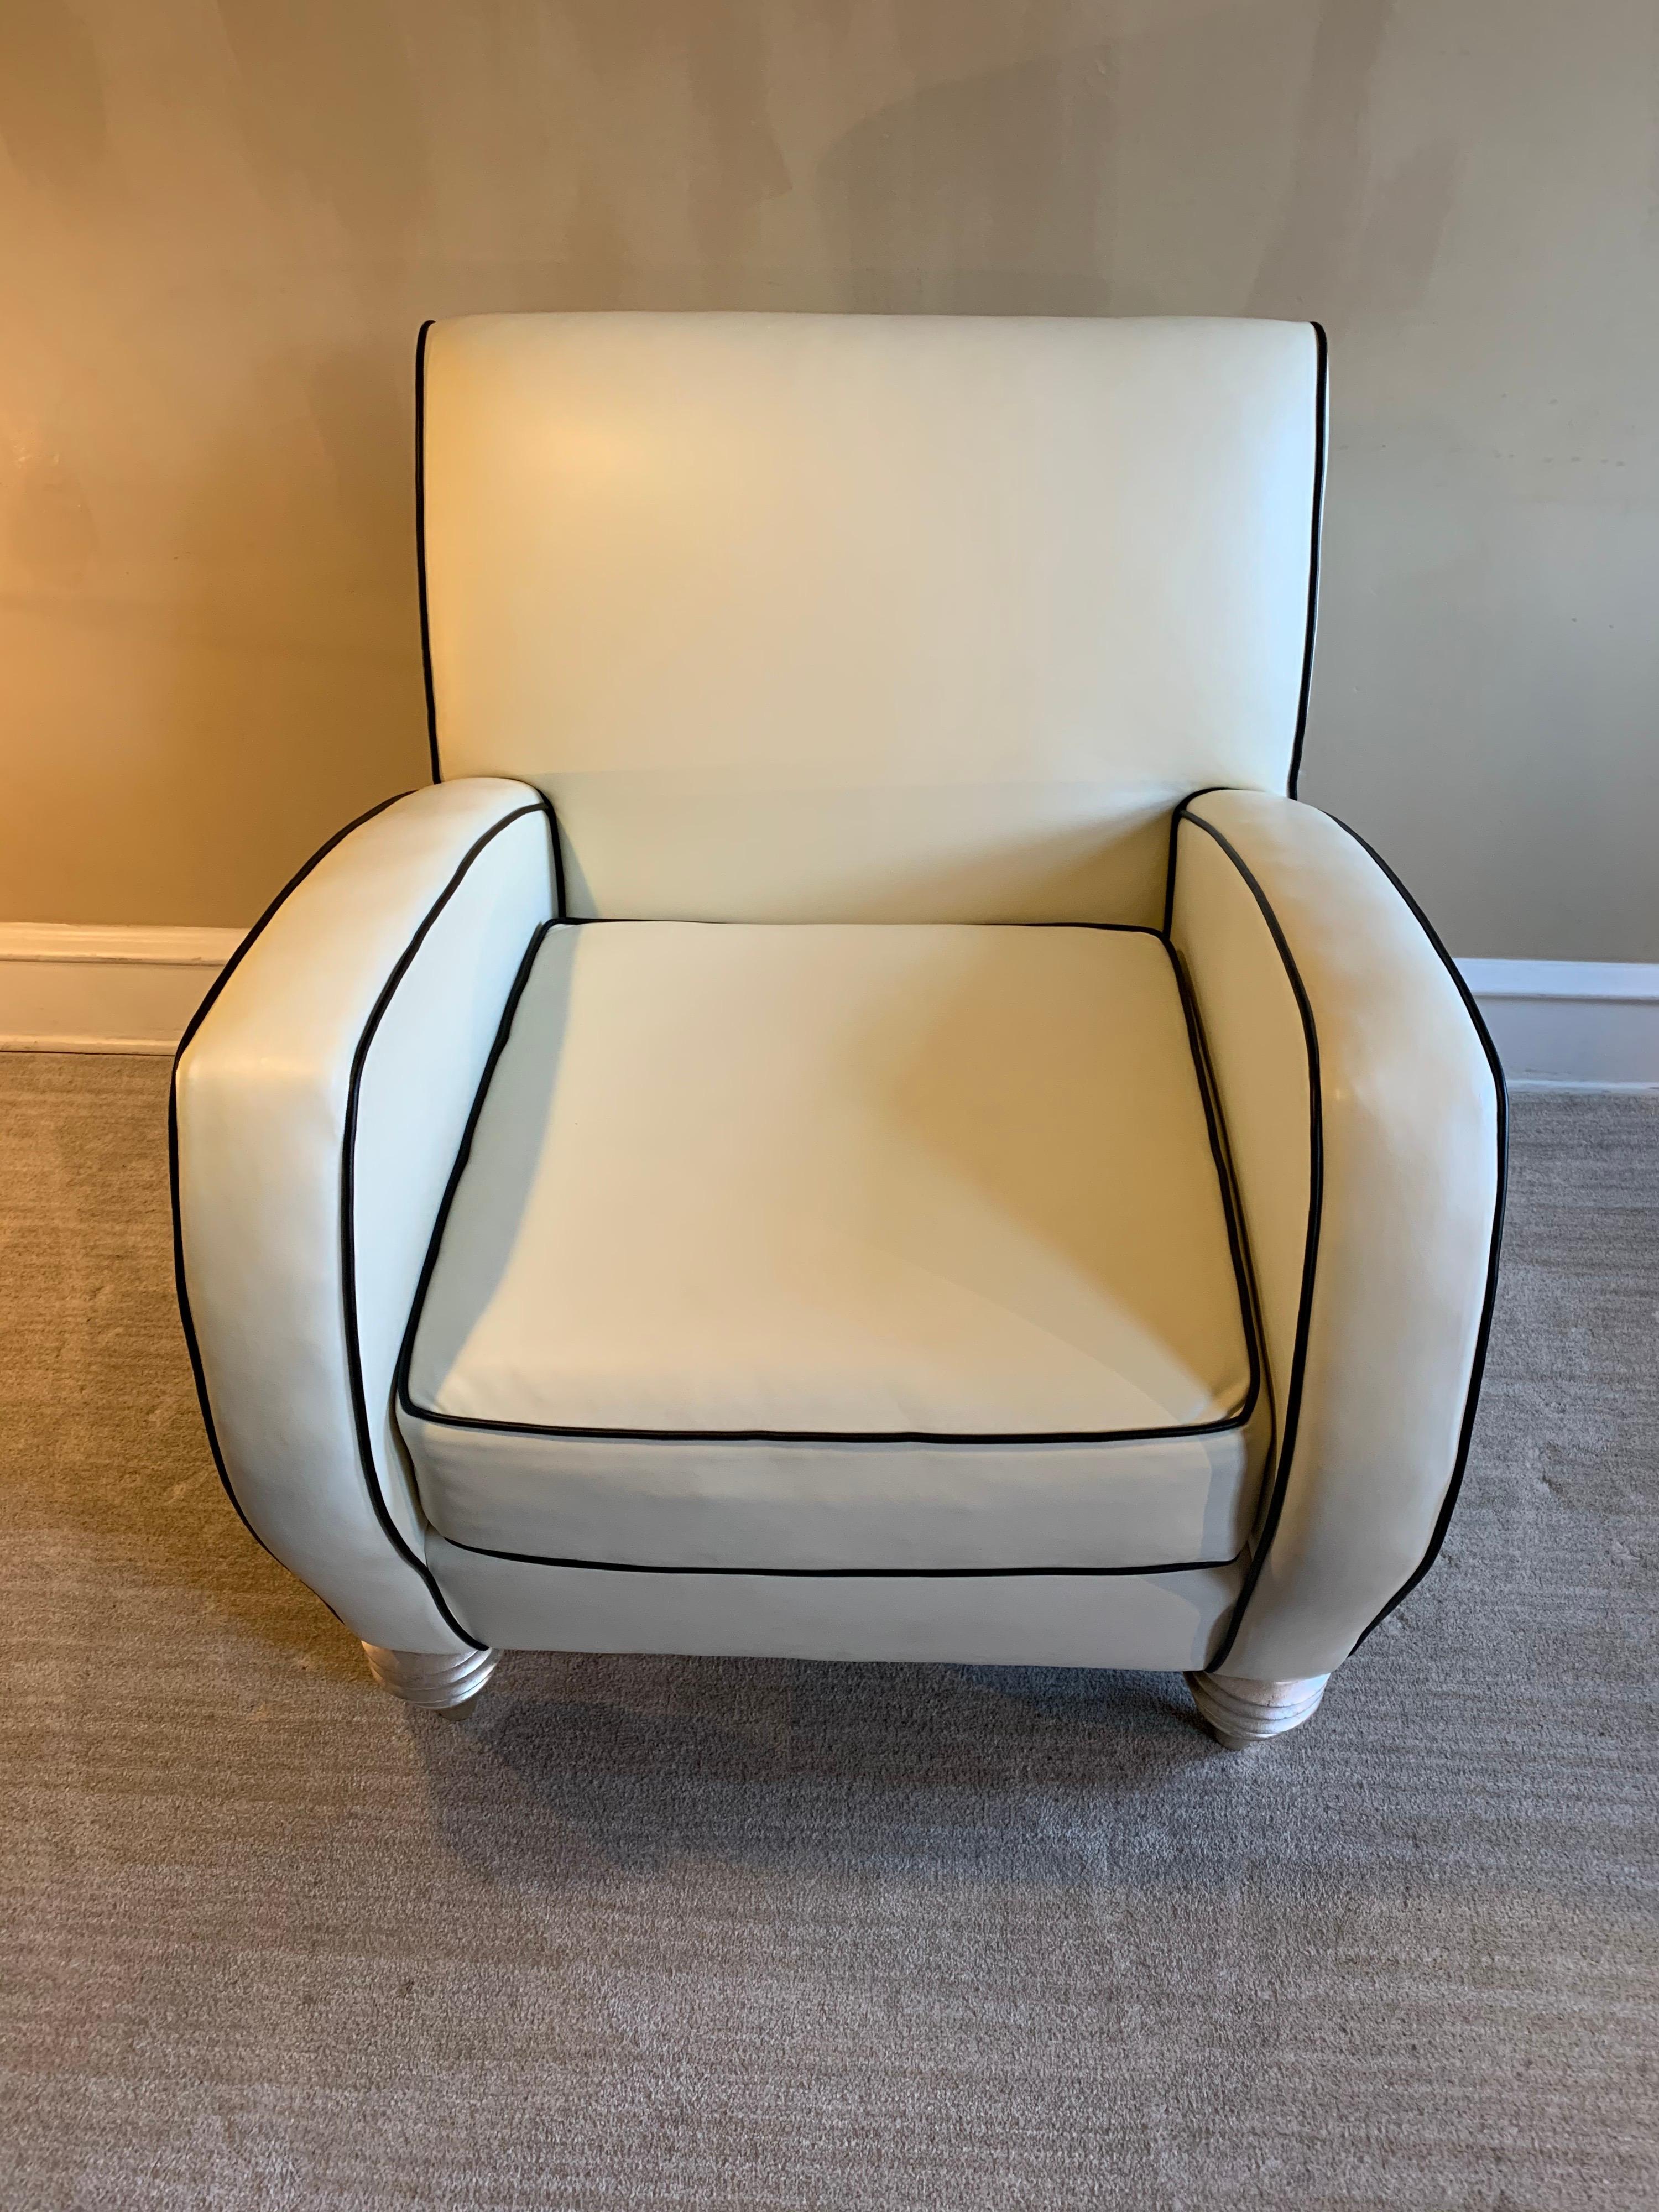 20th Century Art Deco Style Cream Leather Club Chair by Larry Laslo for Directional